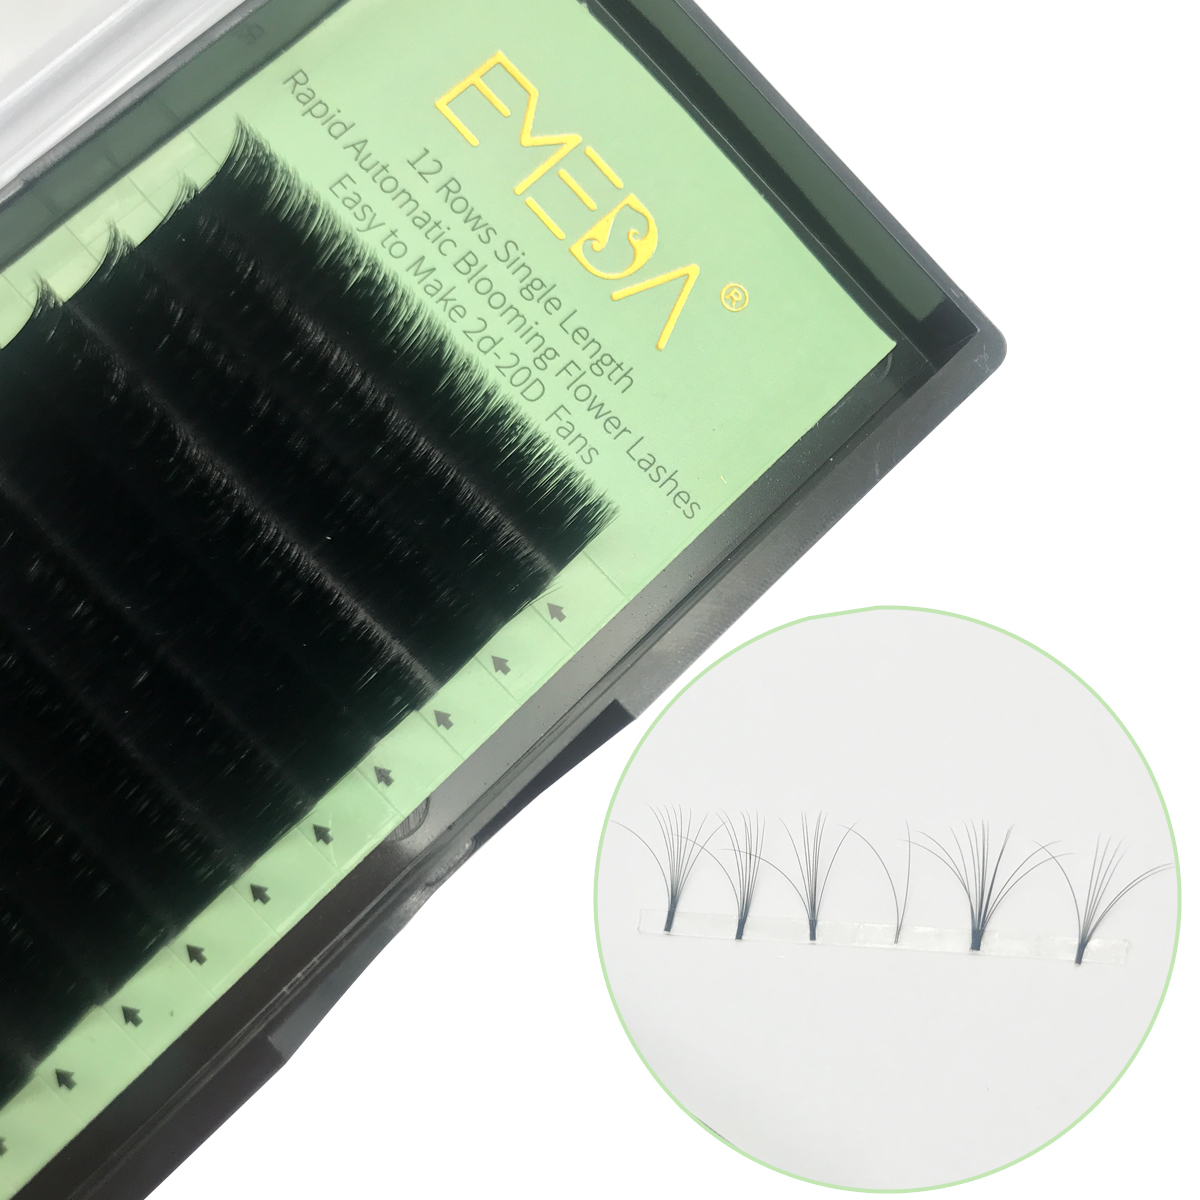 Inquiry for Hot Amazon Easy fan volume lash Rapid Blooming Eyelashes Extension 0.05 0.07 Mixed lengths or single length tray XJ47